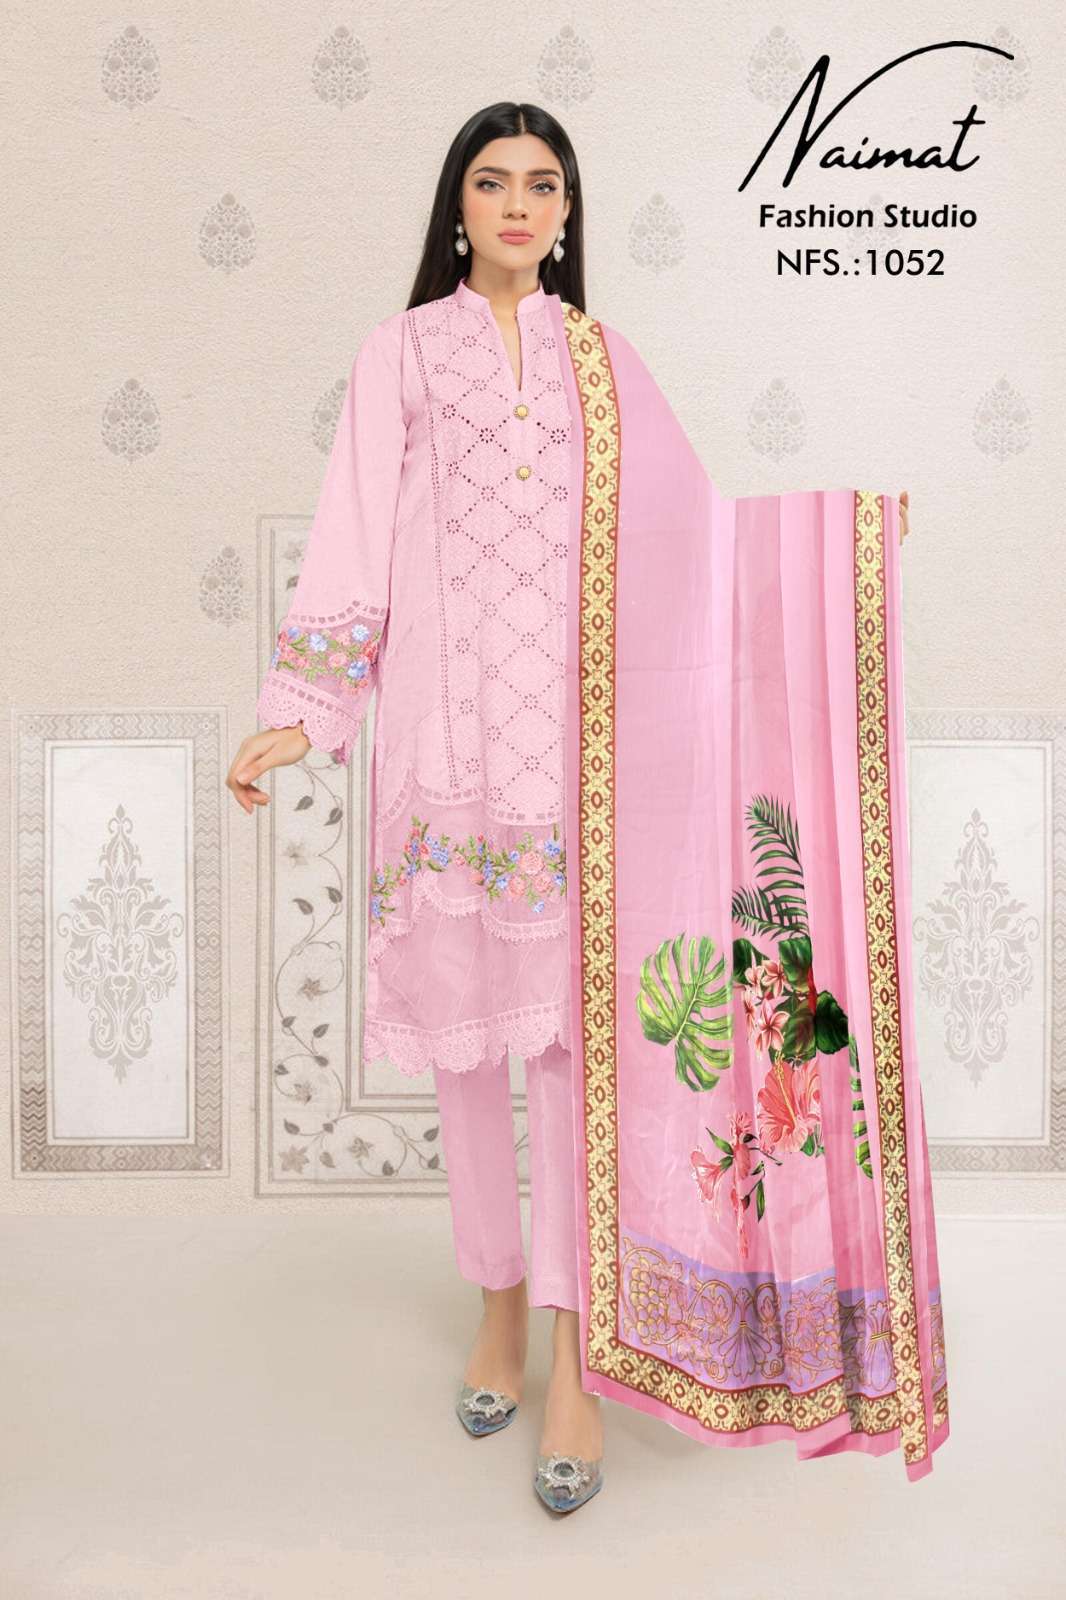 naimat nfs 1052 Pure Fox embroidery work with Digital Print suit